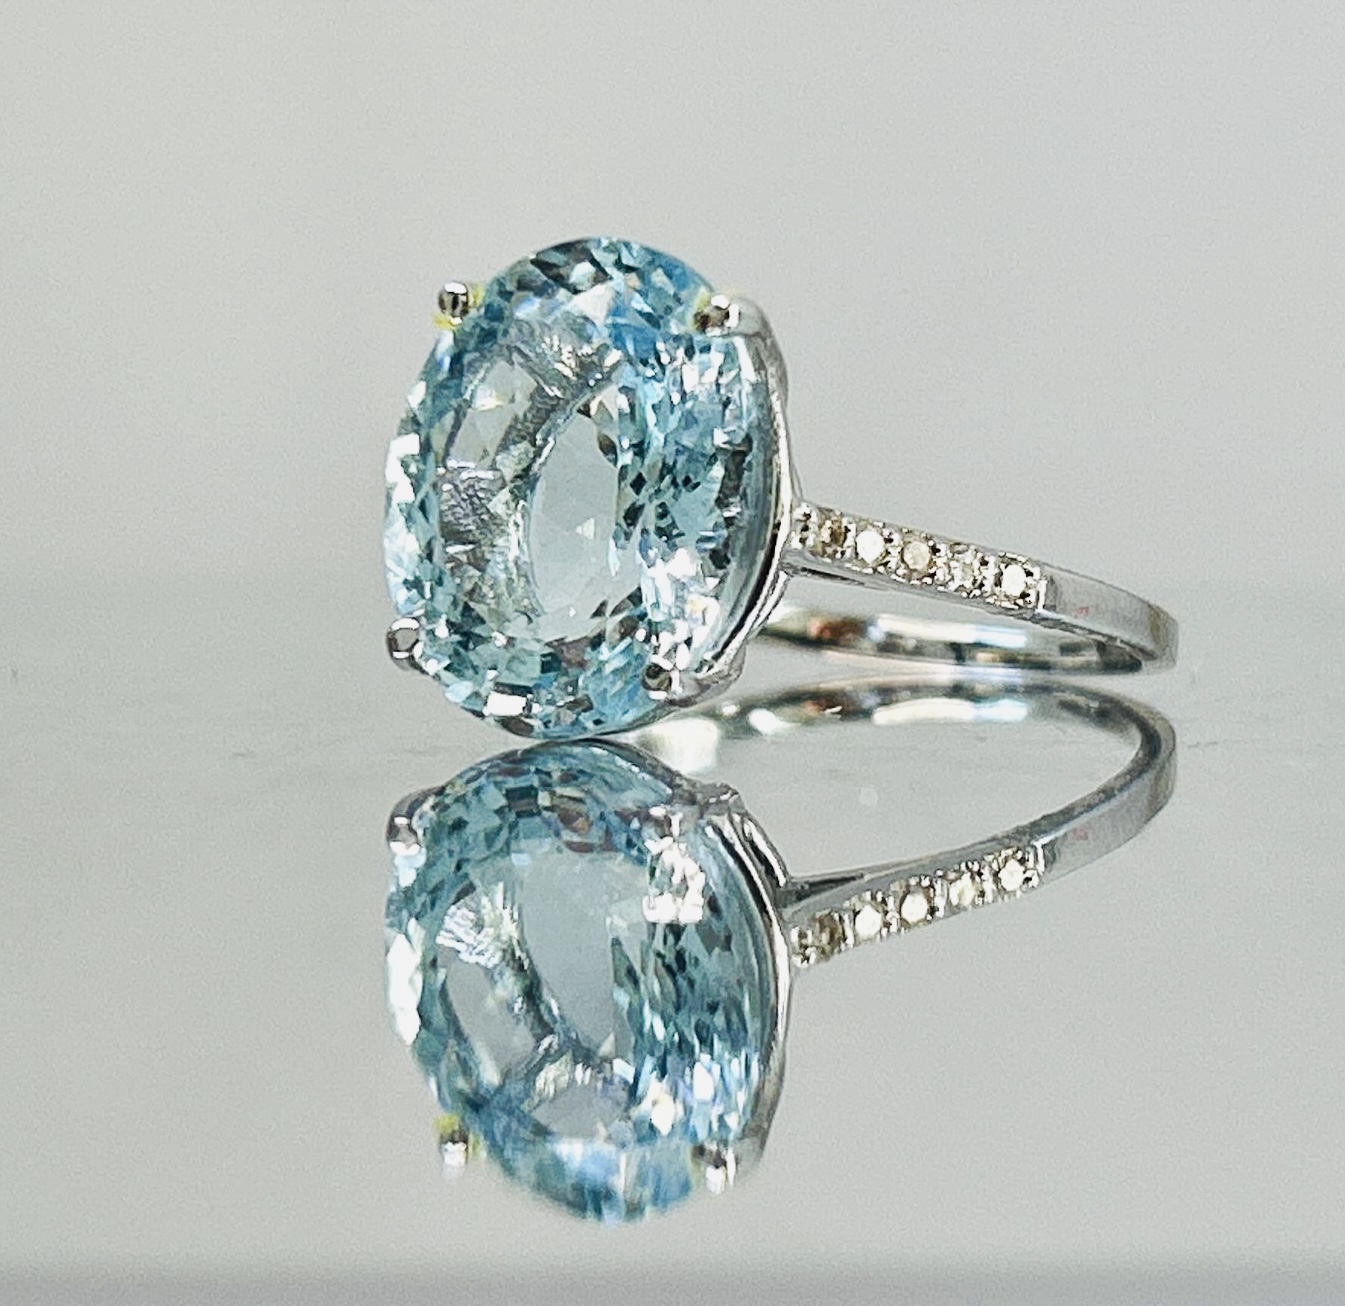 Beautiful Natural Flawless 5.81CT Aquamarine Ring With Diamonds And 18k Gold - Image 5 of 6